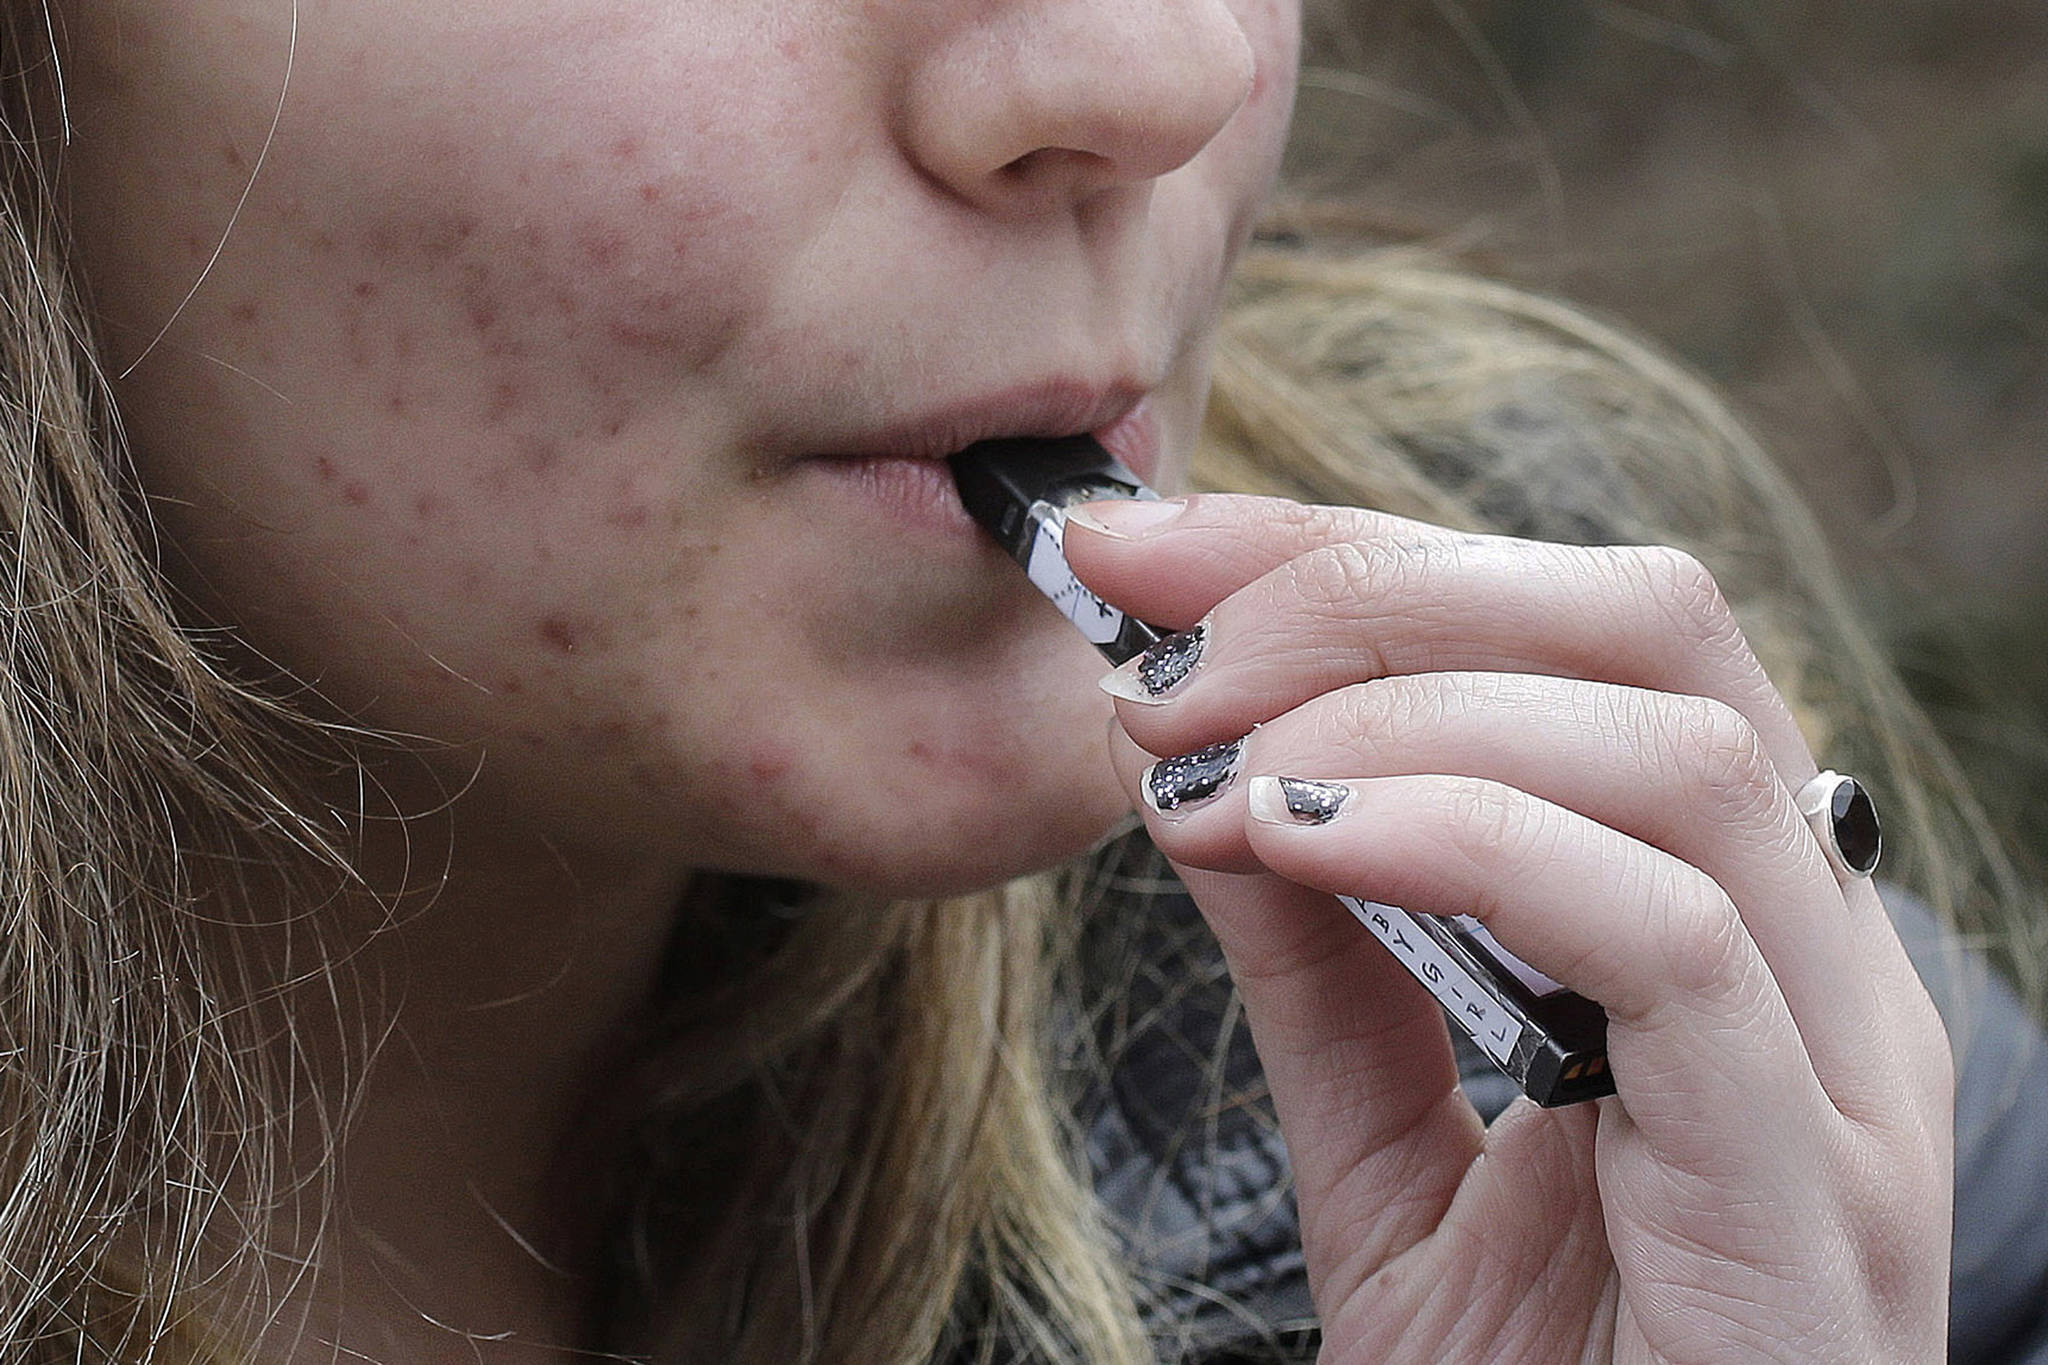 In this April 11, 2018 photo, a high school student uses a vaping device near a school campus in Cambridge, Massachusetts. (Steven Senne | Associated Press File)